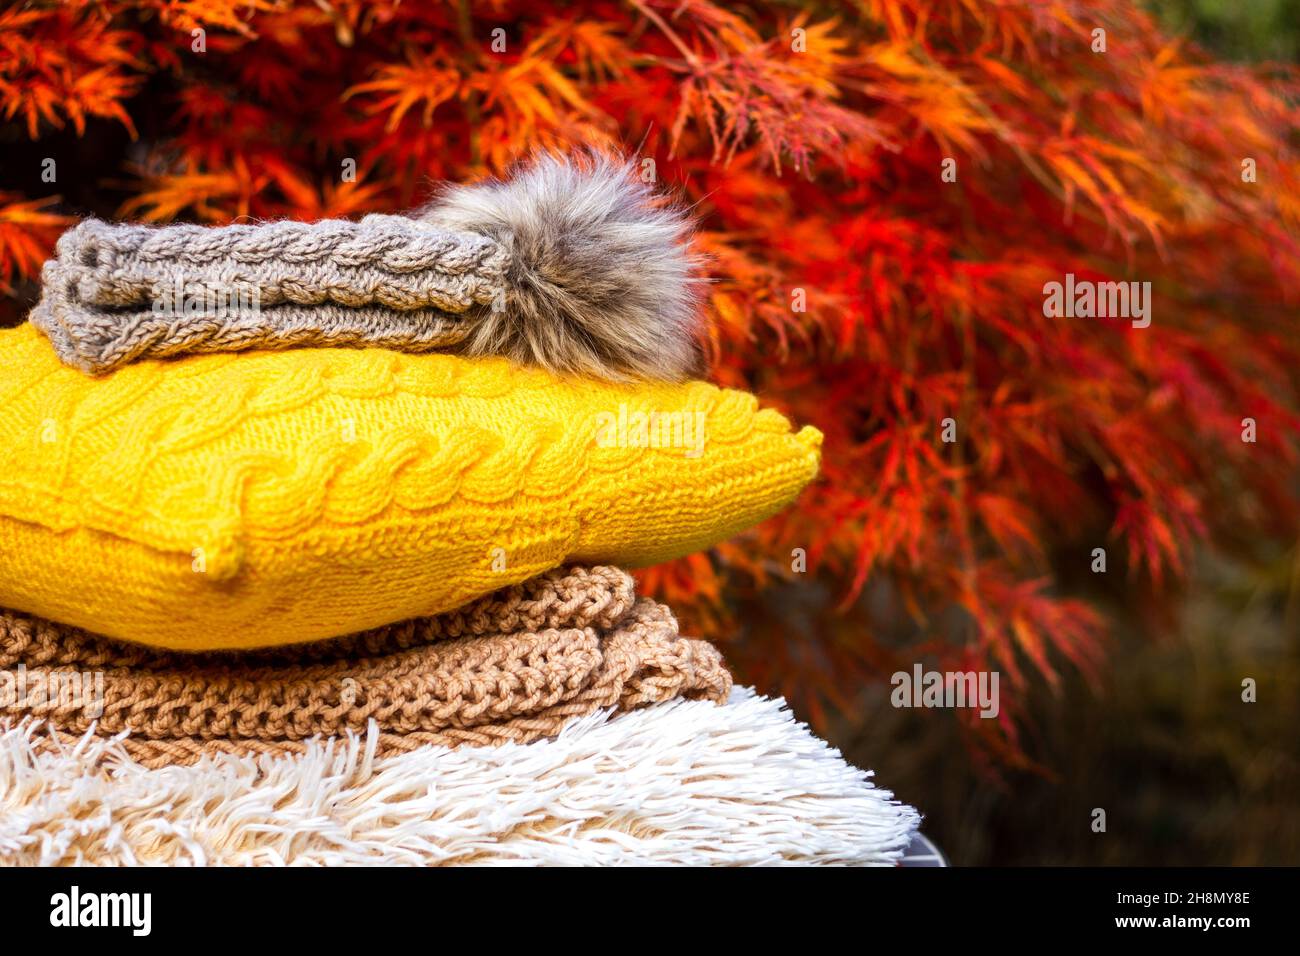 Stack of knitted warm clothing and wool pillow. Autumn leaf background. Knit hat with pom pom and sweater Stock Photo